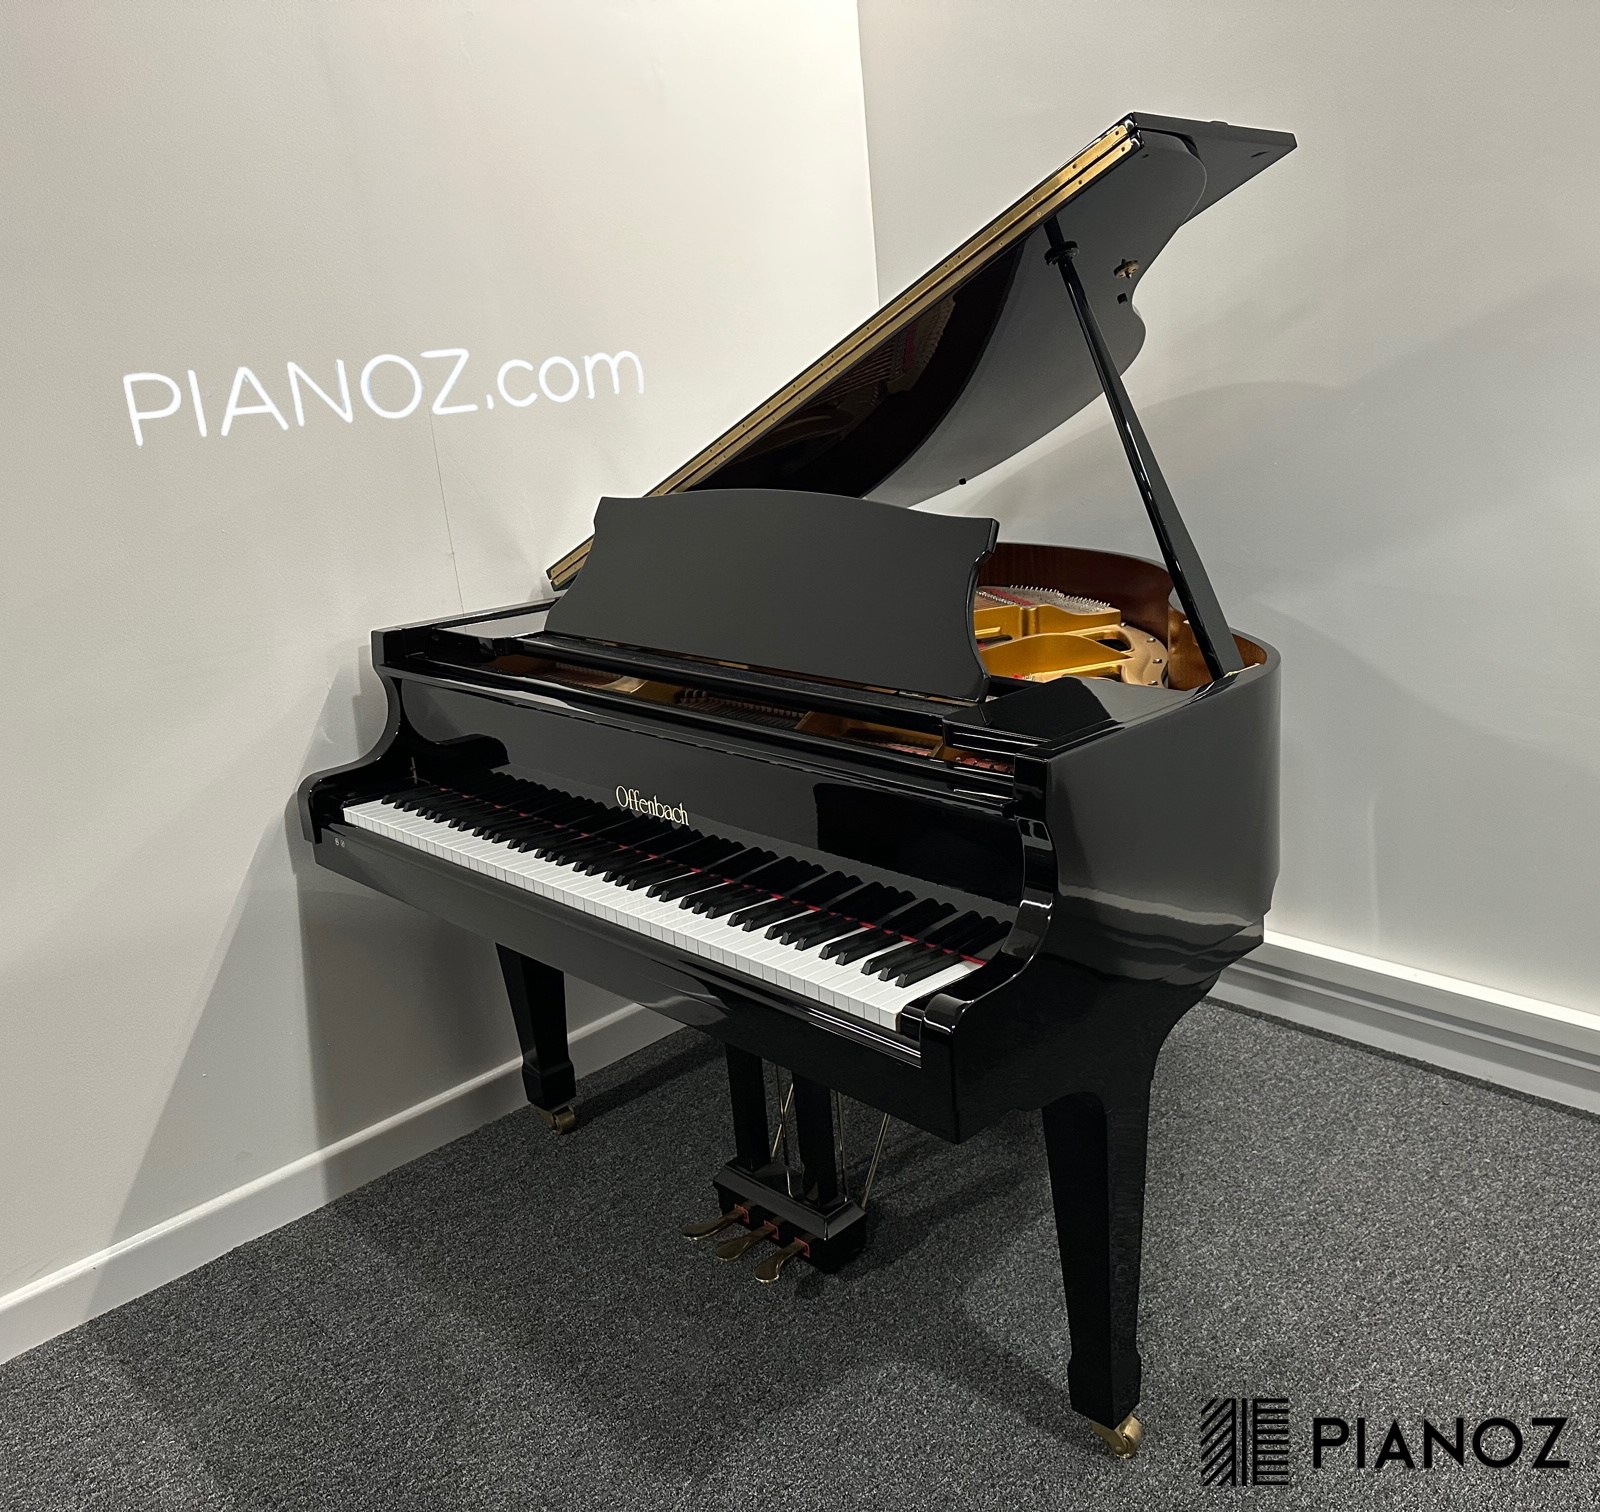 Offenbach Black Gloss Baby Grand Piano piano for sale in UK